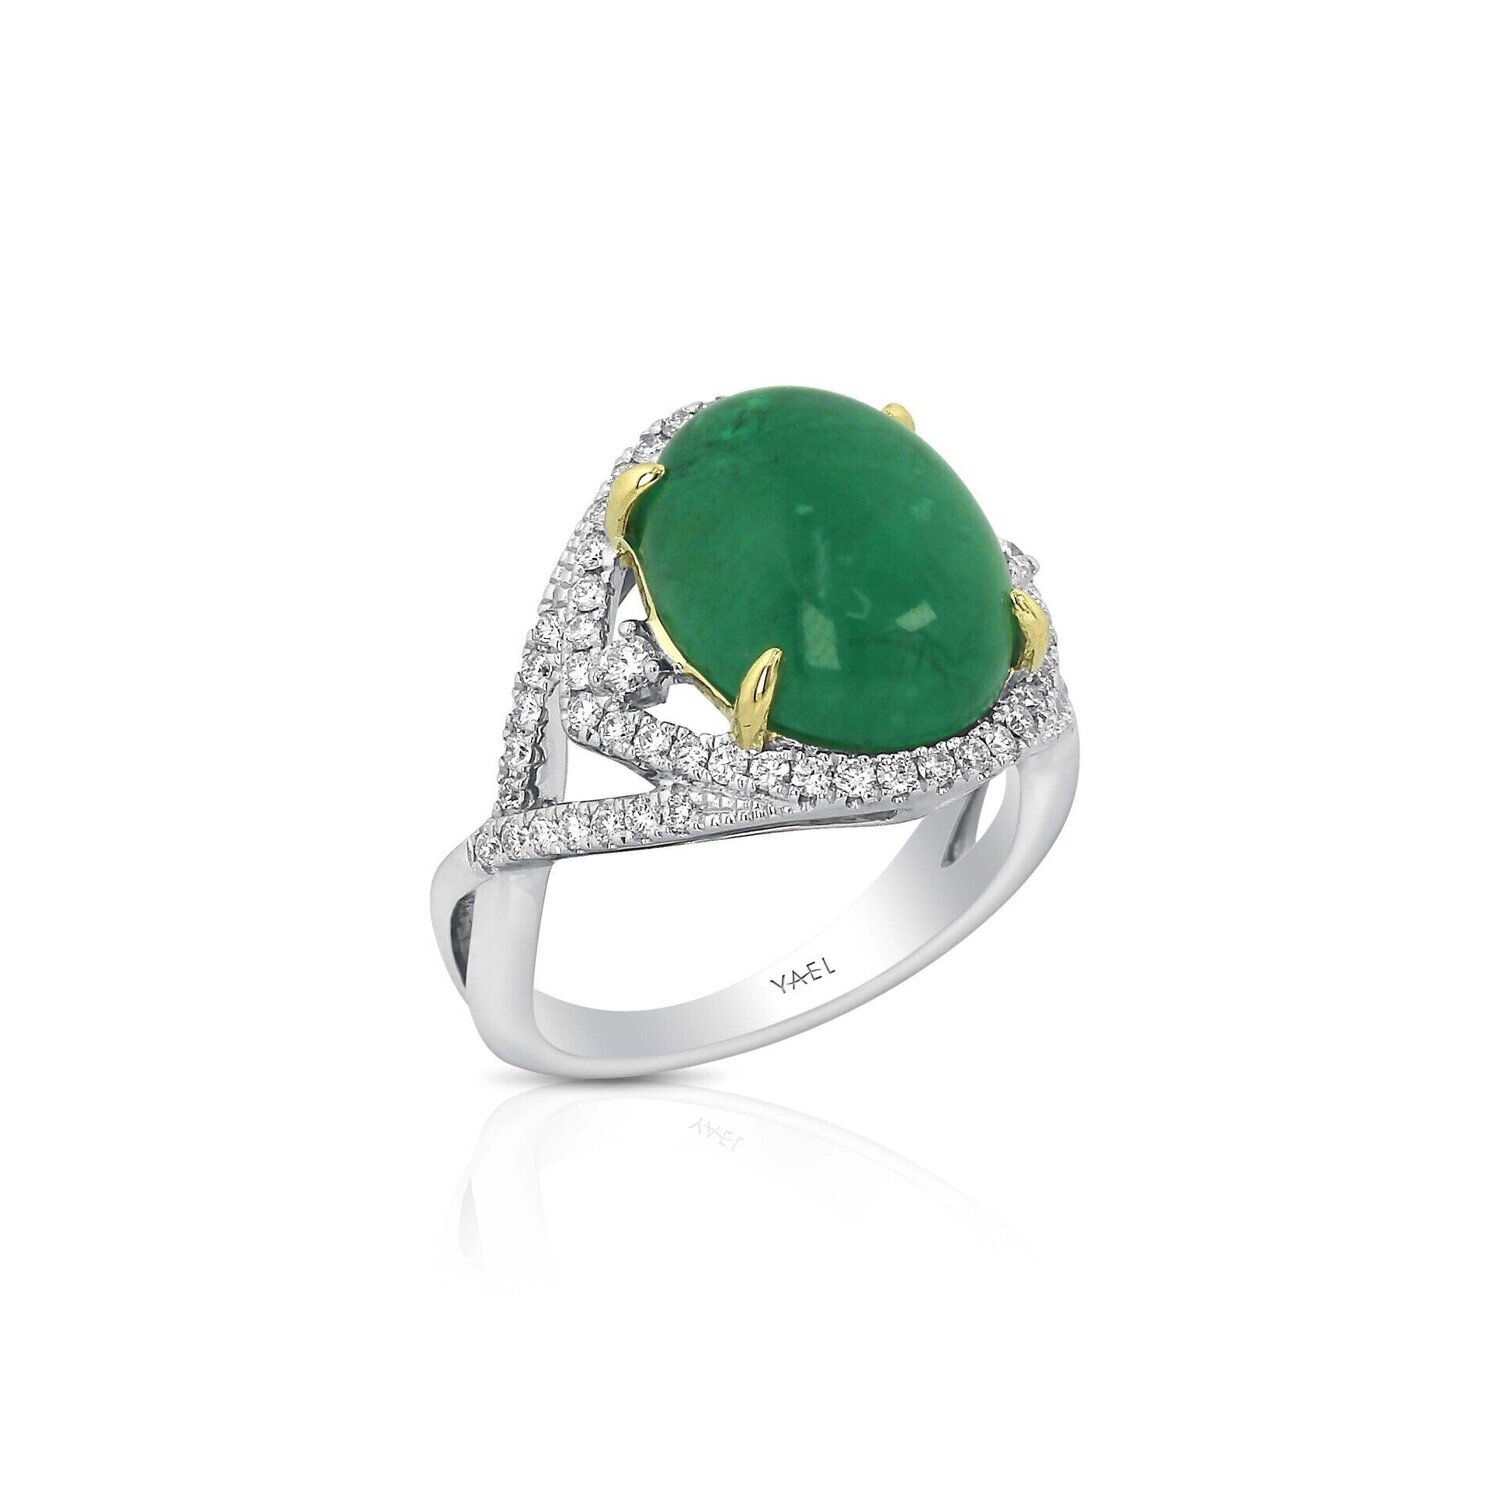 18kt White and Yellow Gold - Oval Emerald: 7.19ct - White Round Diamond: 0.50ct